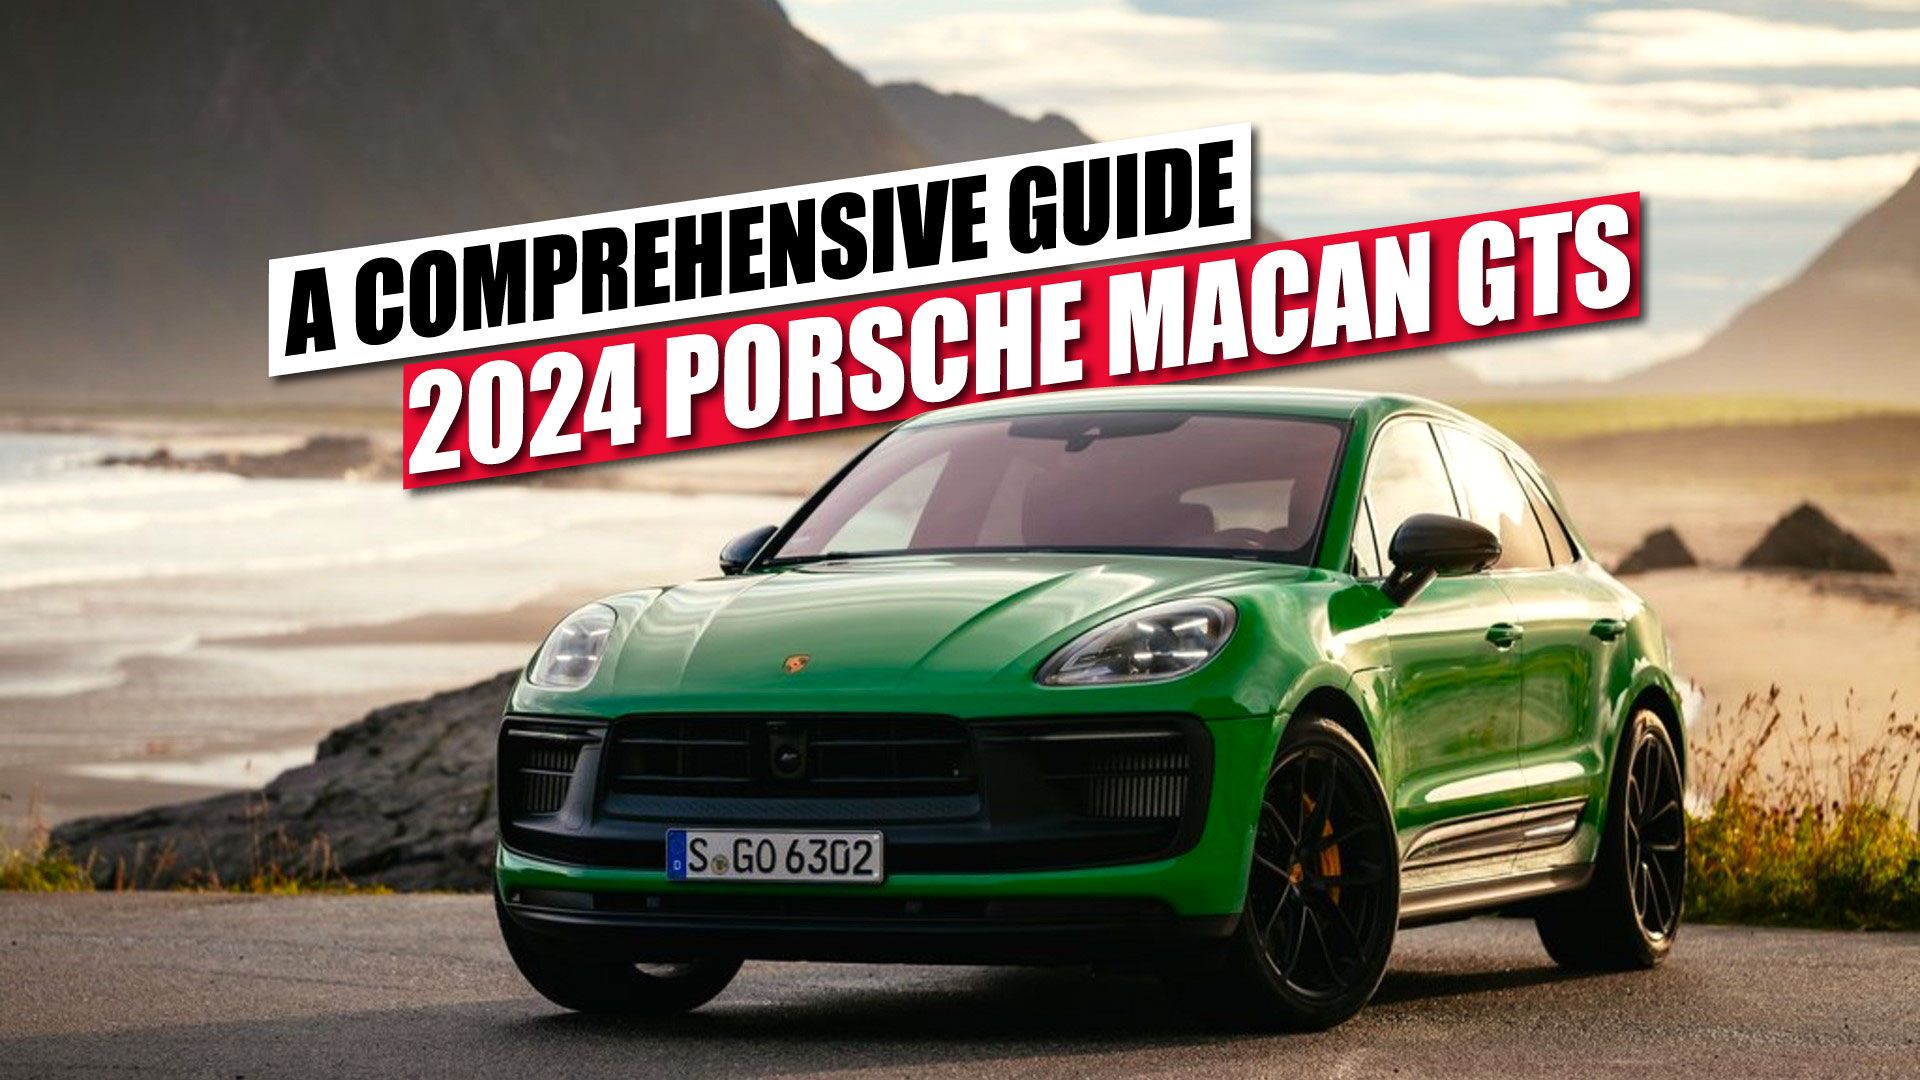 2024 Porsche Macan GTS A Comprehensive Guide On Features, Specs, And